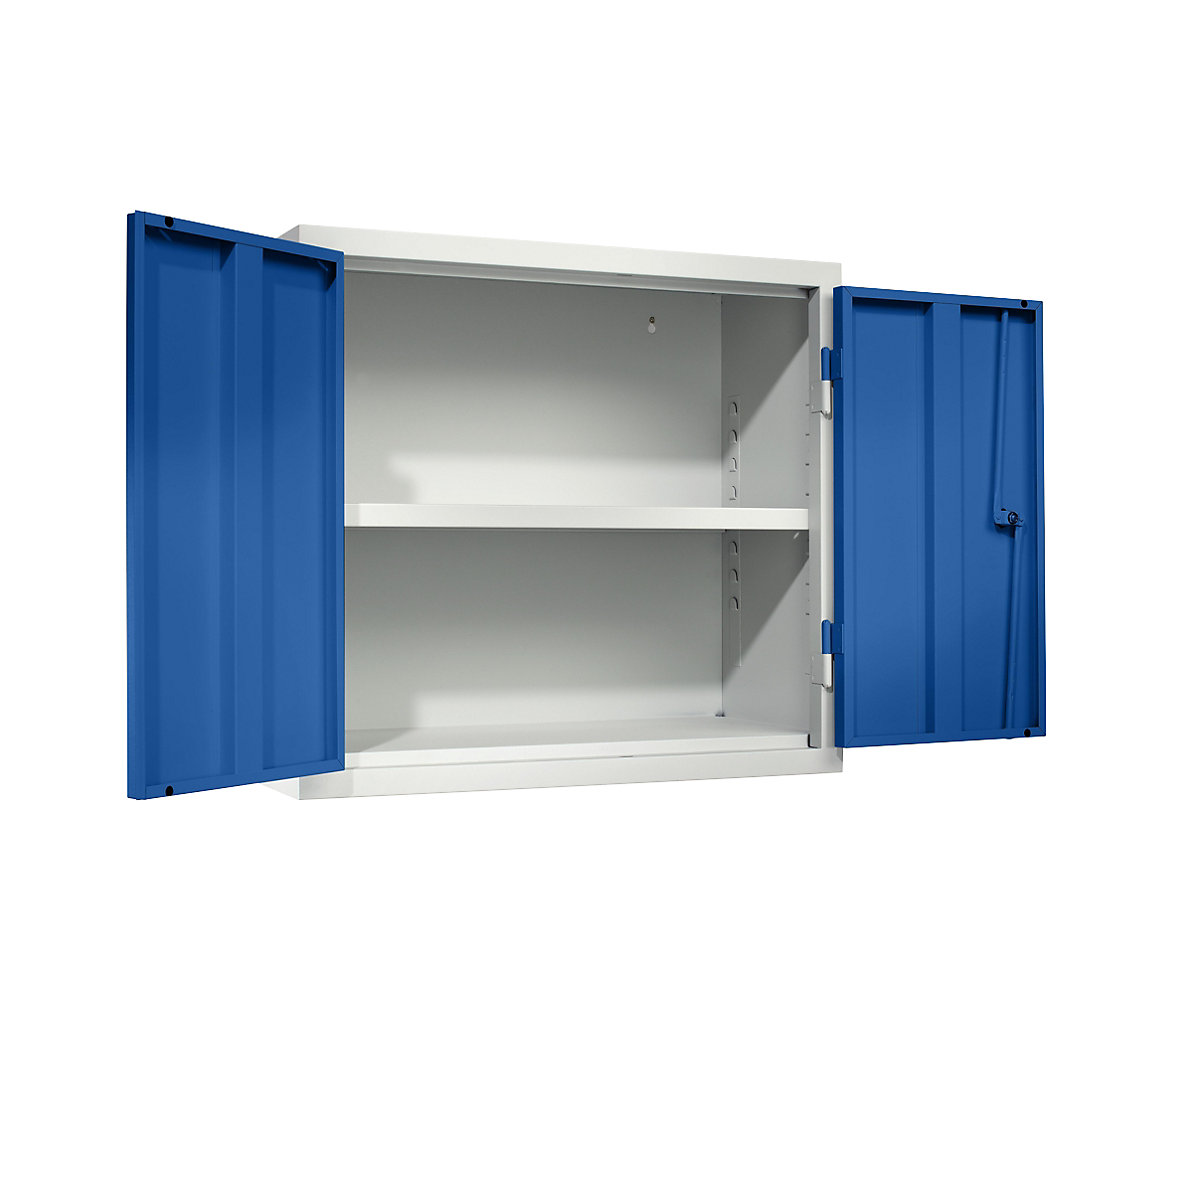 Wall mounted cupboard for the workshop – eurokraft basic, HxWxD 600 x 650 x 320 mm, solid panel doors, gentian blue RAL 5010-6